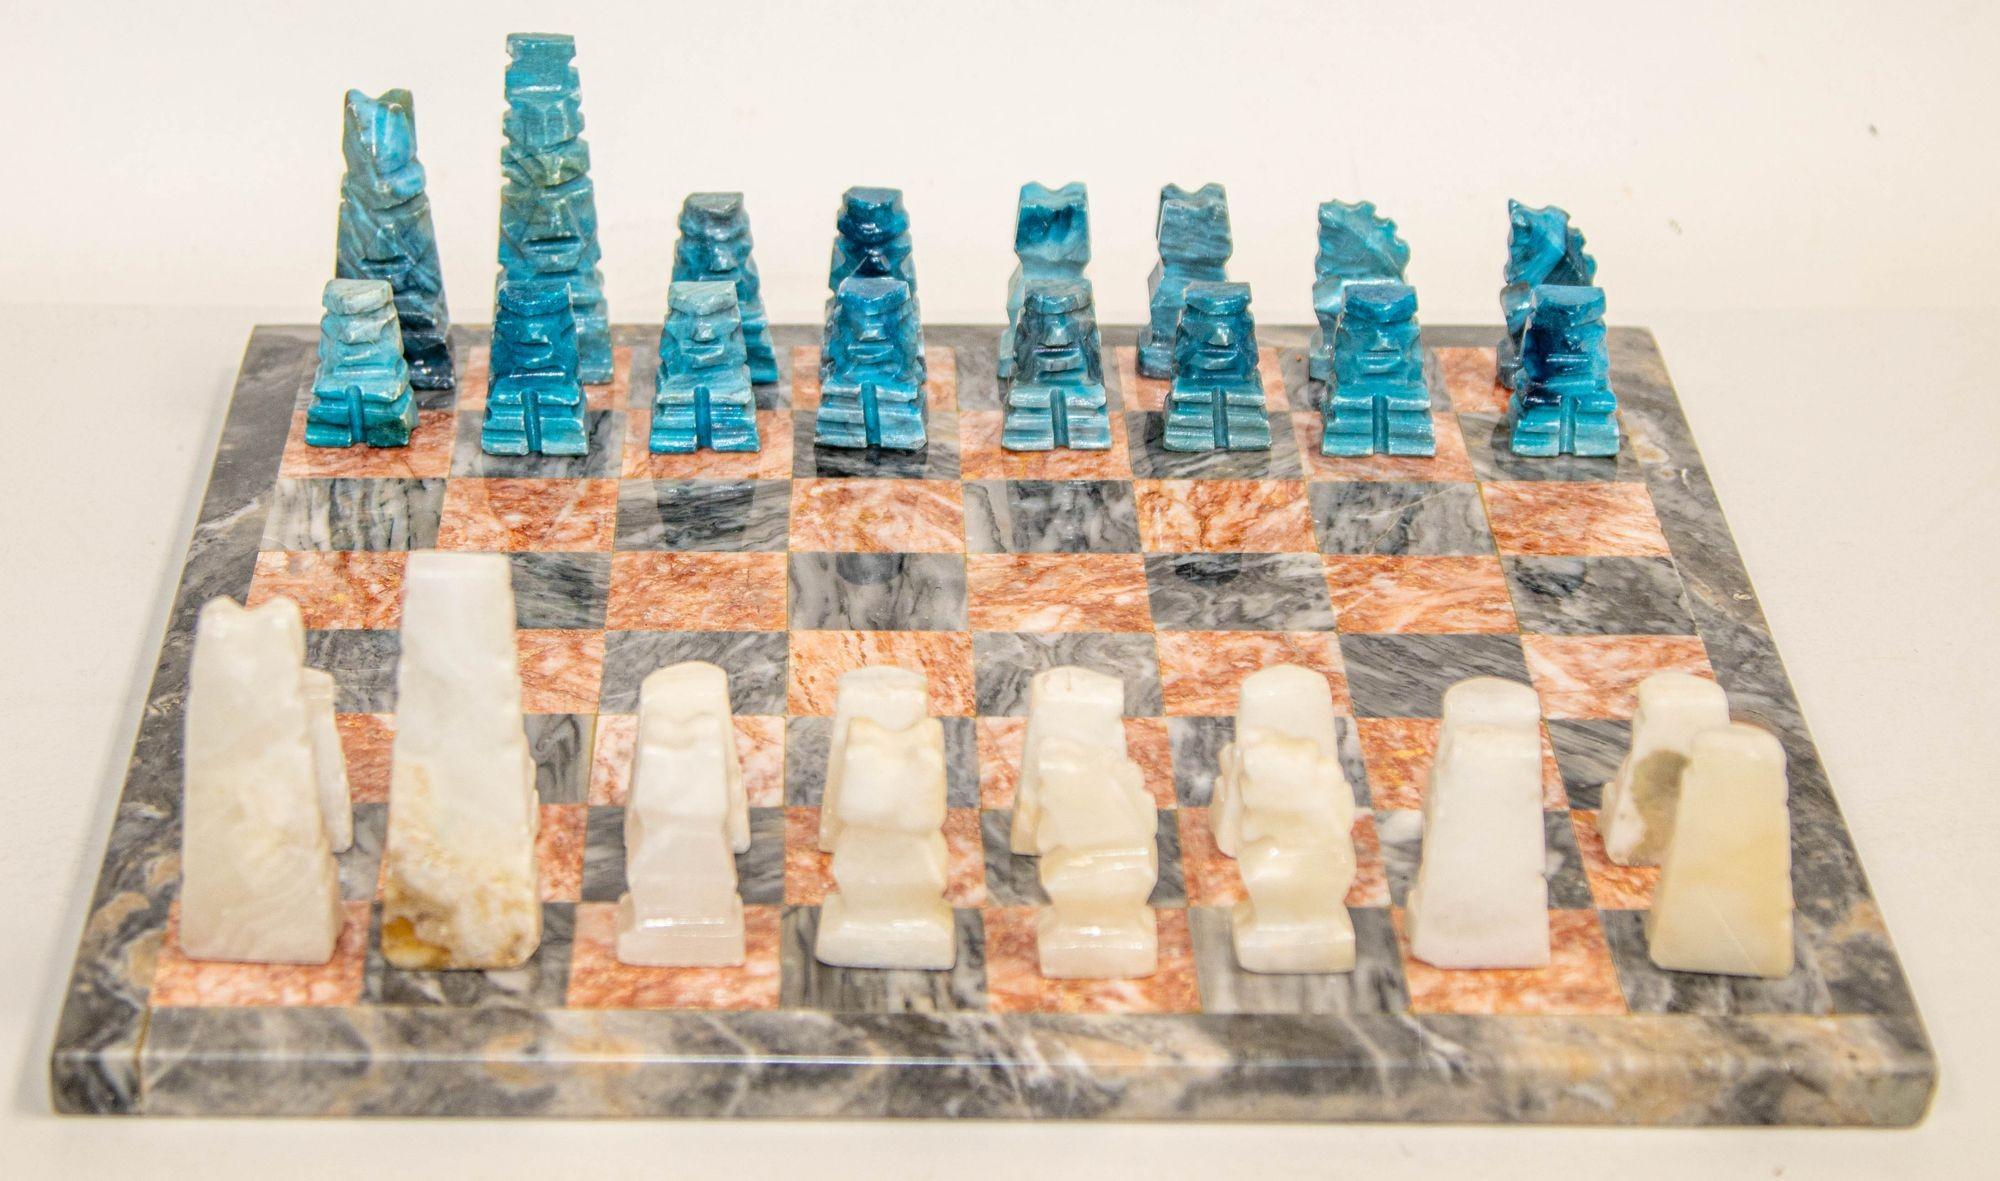 Vintage Marble Chess Set with Hand Carved Turquoise and White Onyx Pieces For Sale 2